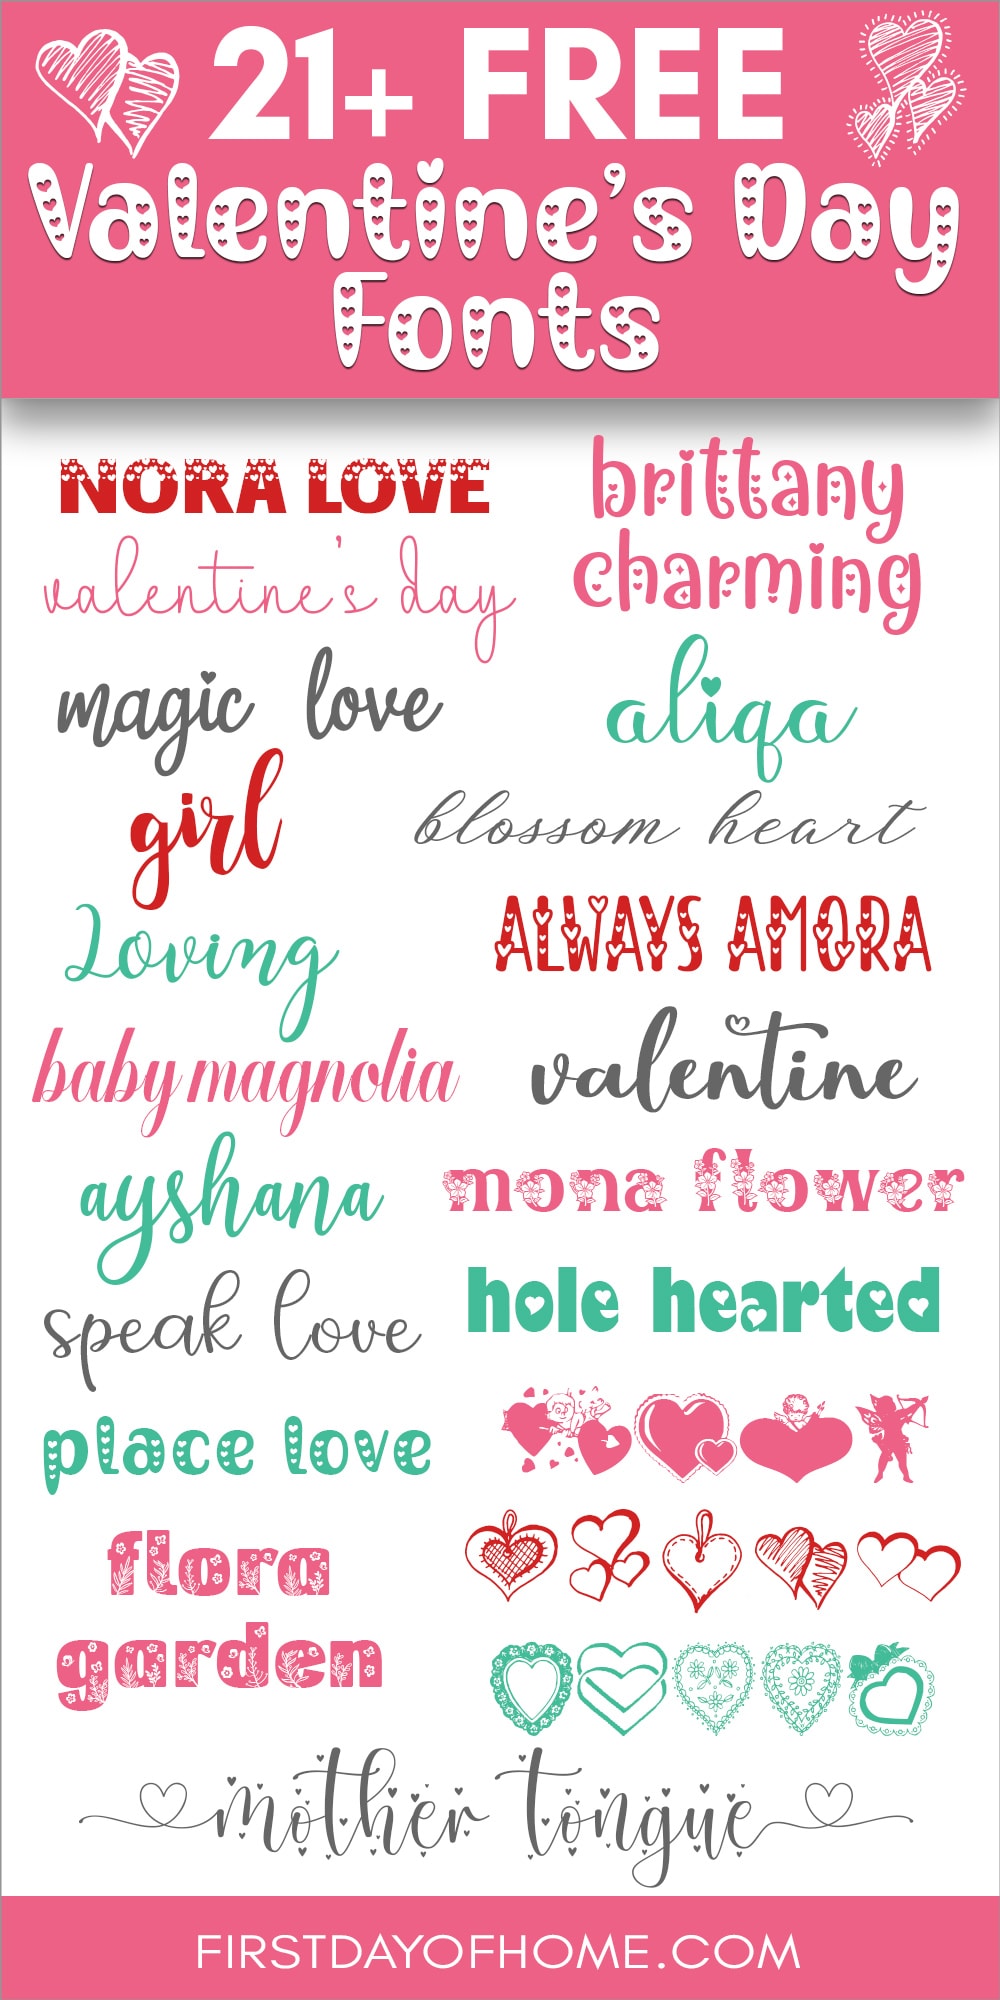 Collection of various free Valentine's Day fonts with text overlay reading "21+ Free Valentine's Day Fonts"